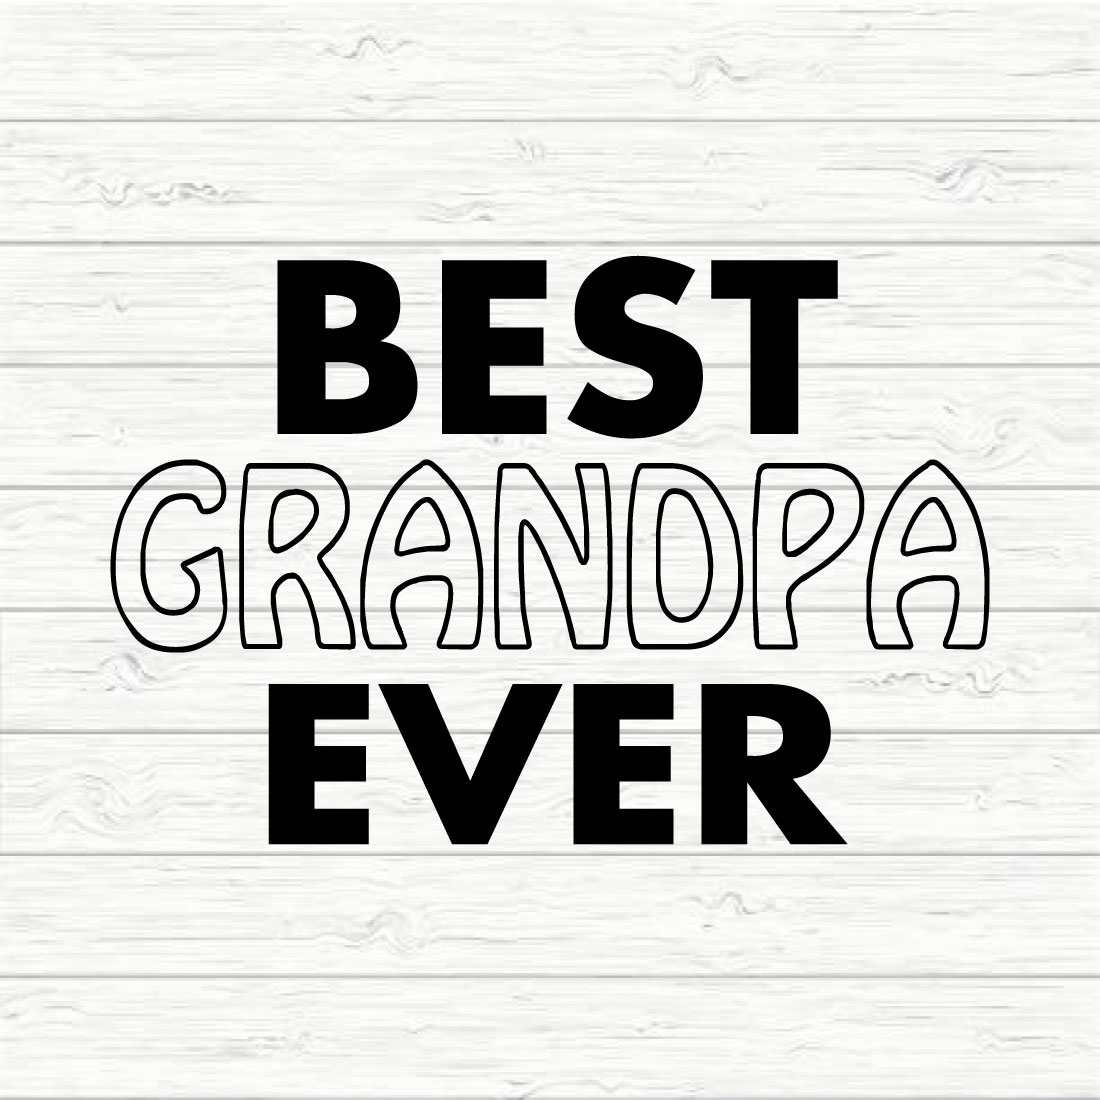 Best grandpa ever preview image.